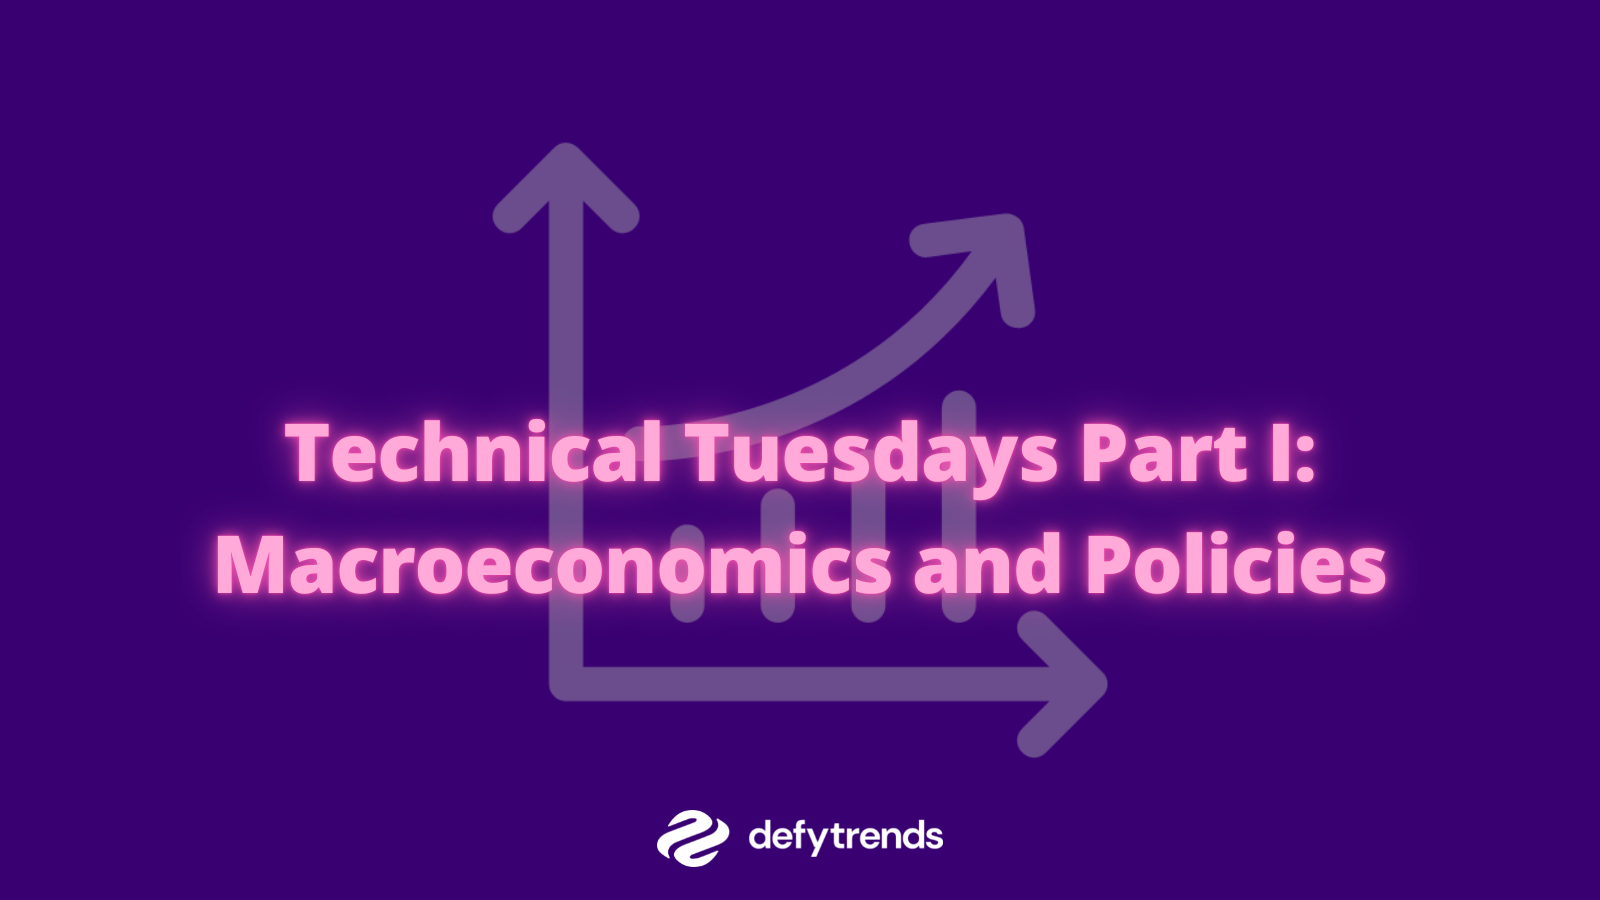 Technical Tuesdays Part I: Macroeconomics and Policies